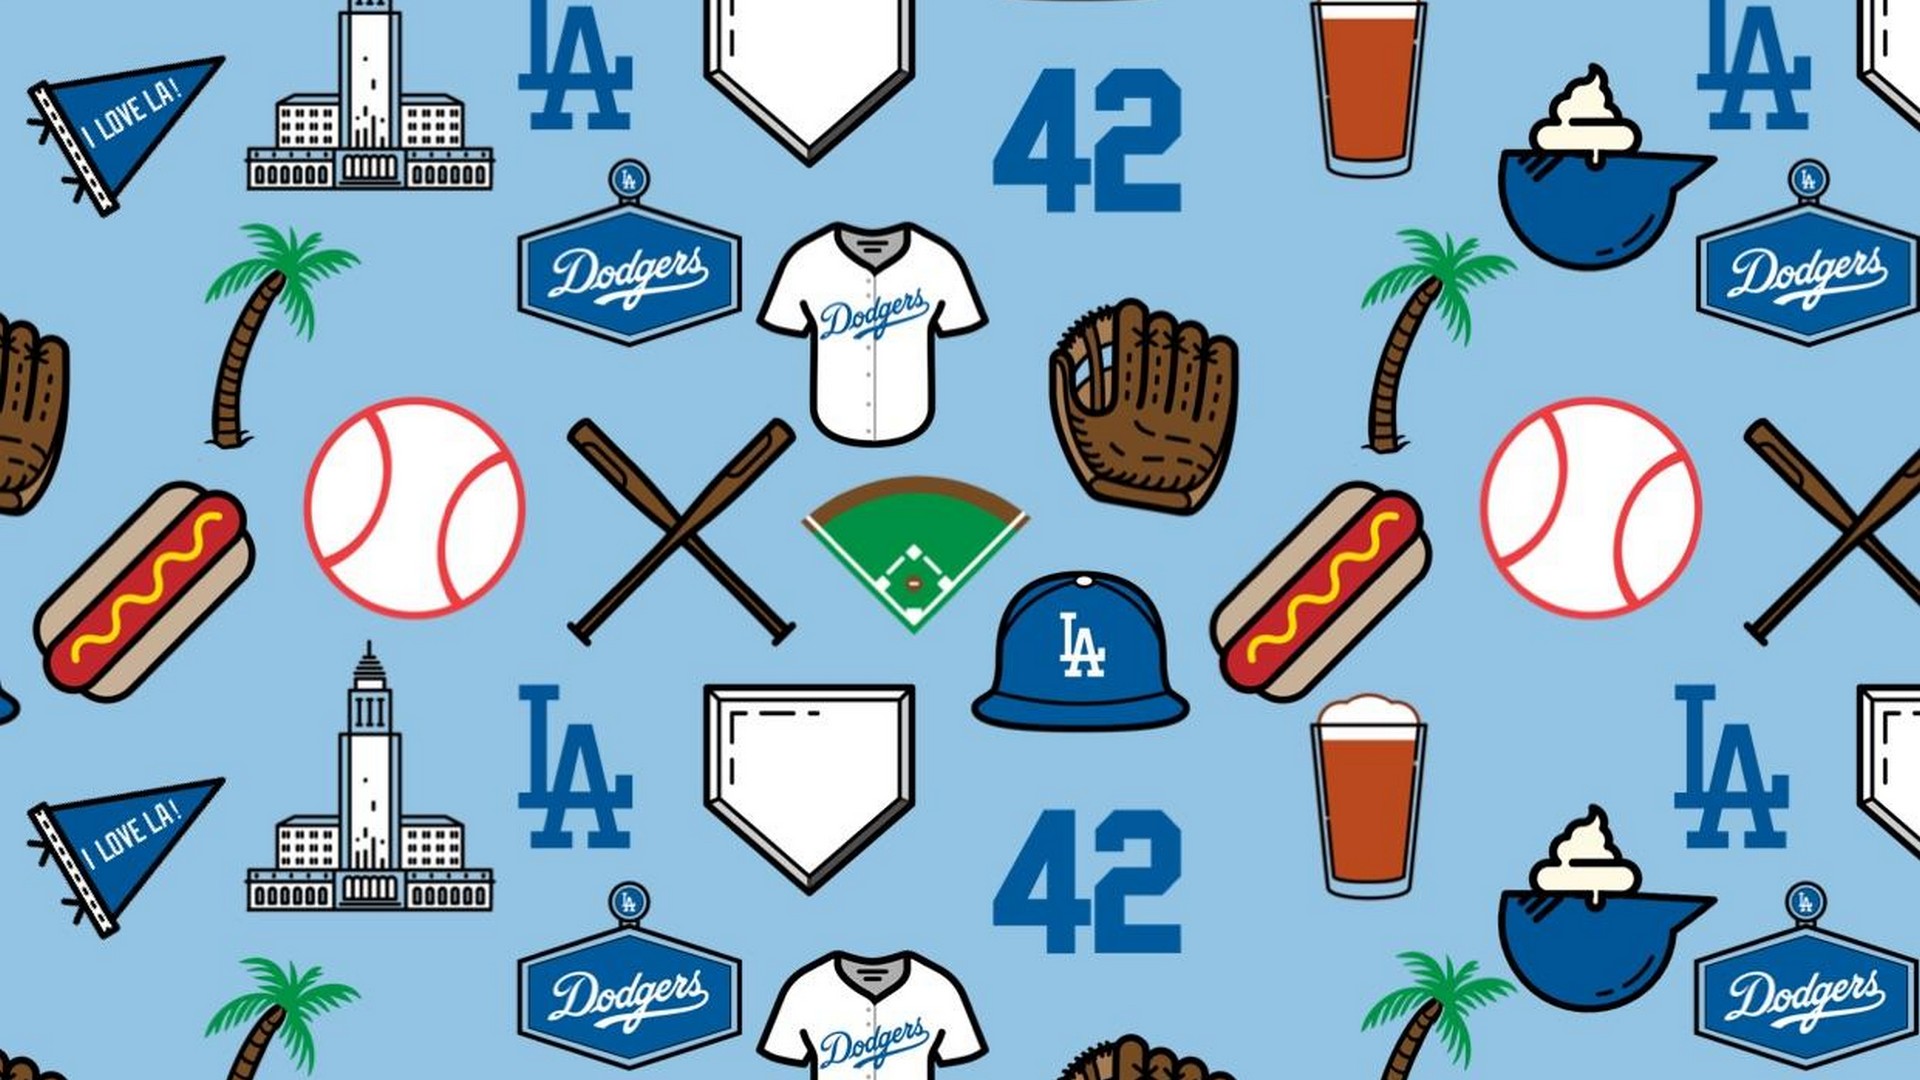 Wallpapers Los Angeles Dodgers With high-resolution 1920X1080 pixel. You can use this wallpaper for Mac Desktop Wallpaper, Laptop Screensavers, Android Wallpapers, Tablet or iPhone Home Screen and another mobile phone device